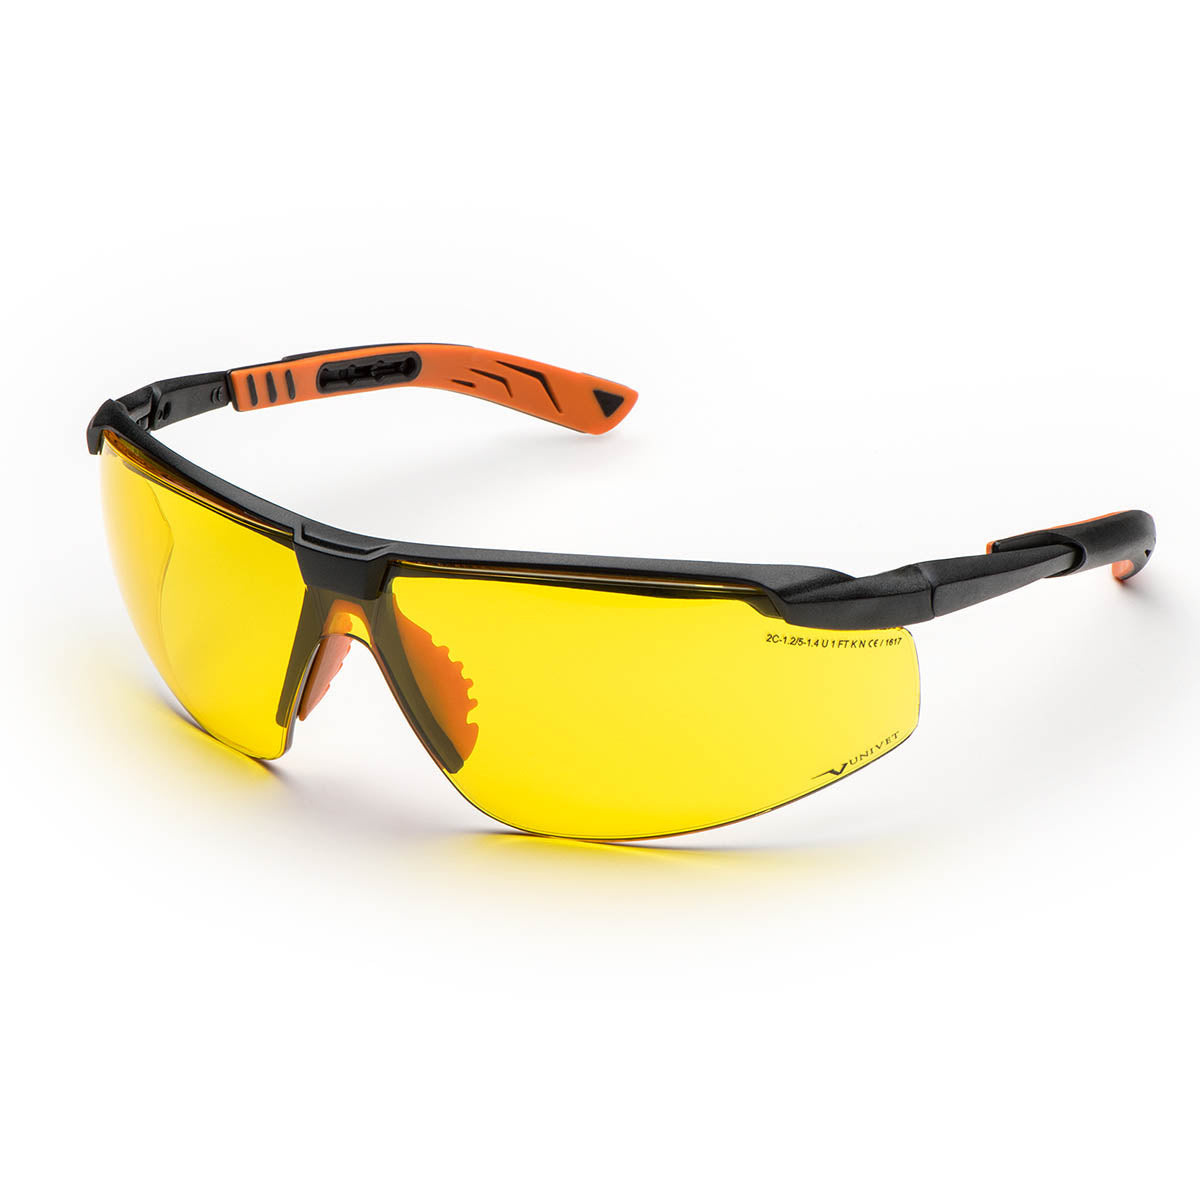 Univet 5X8 Contrast Yellow Lens Safety Glasses 5X8.03.00.03